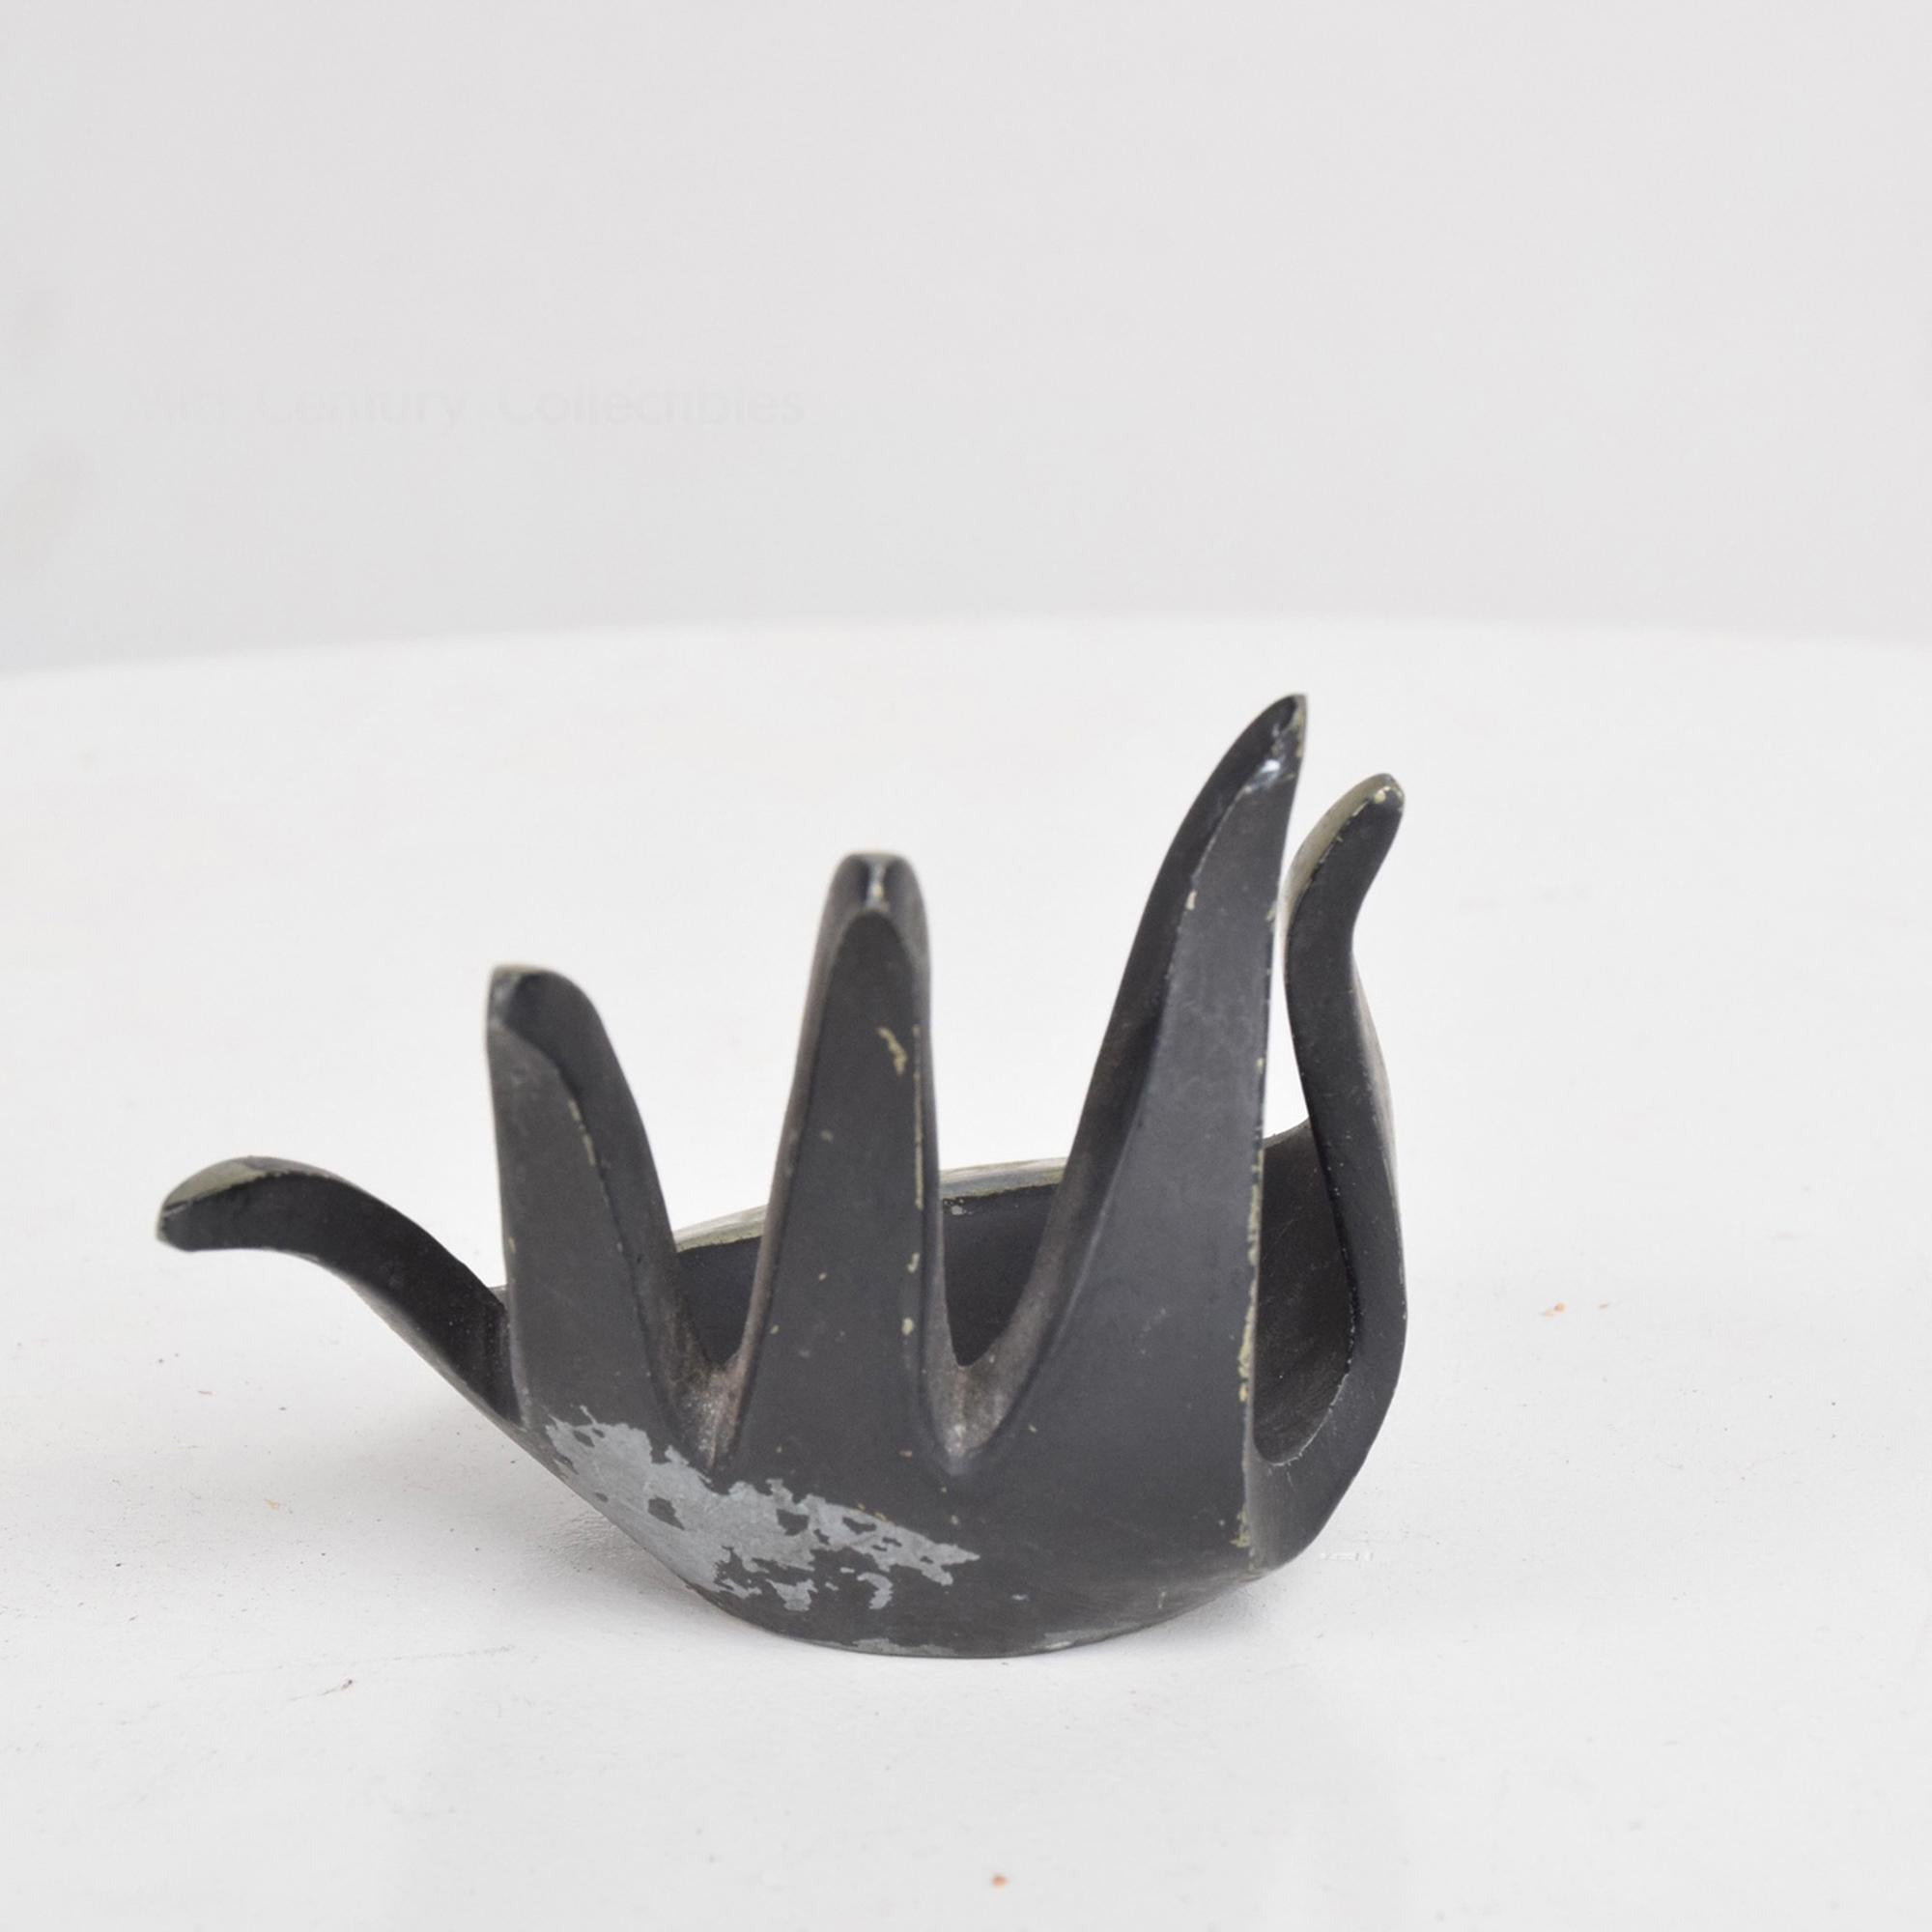 American 1960s Sculptural Abstract Hand Form ASHTRAY Dish after Modernist Walter BOSSE 